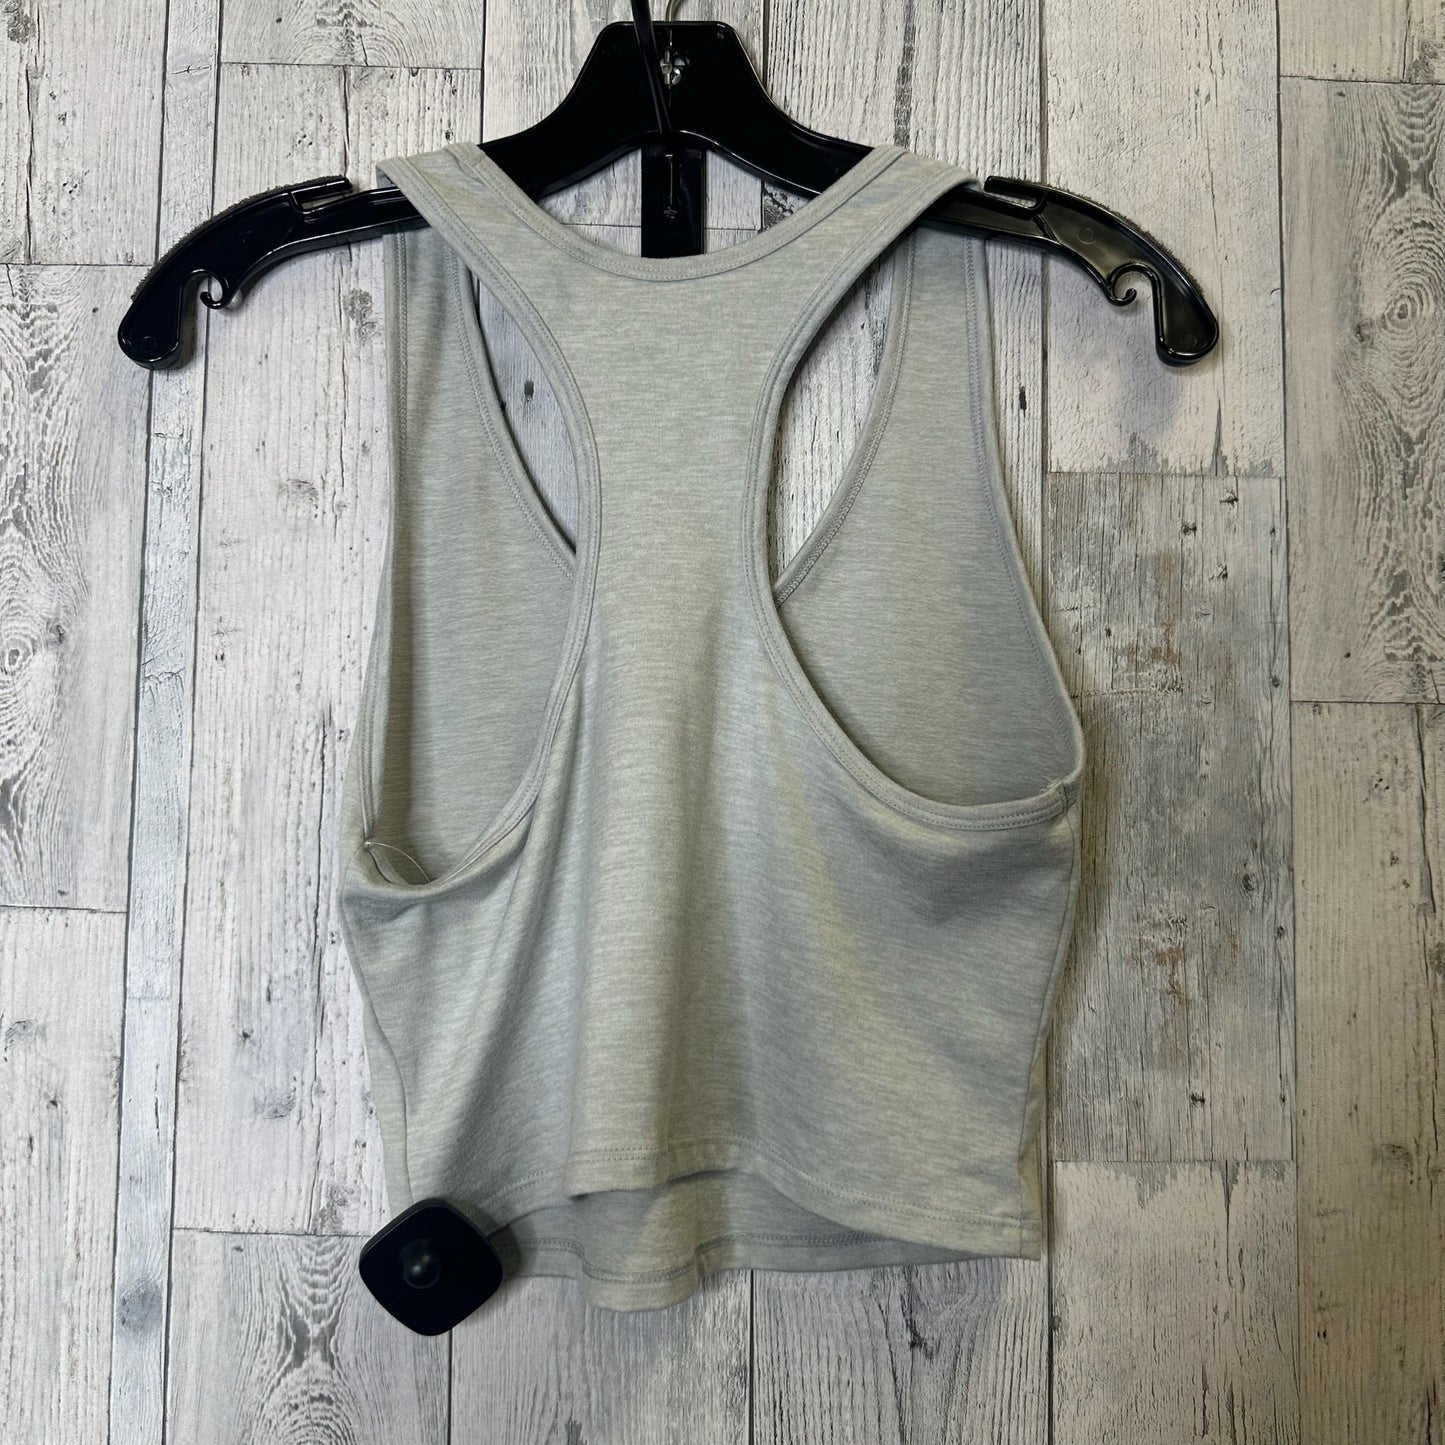 Athletic Tank Top By Gapfit  Size: M